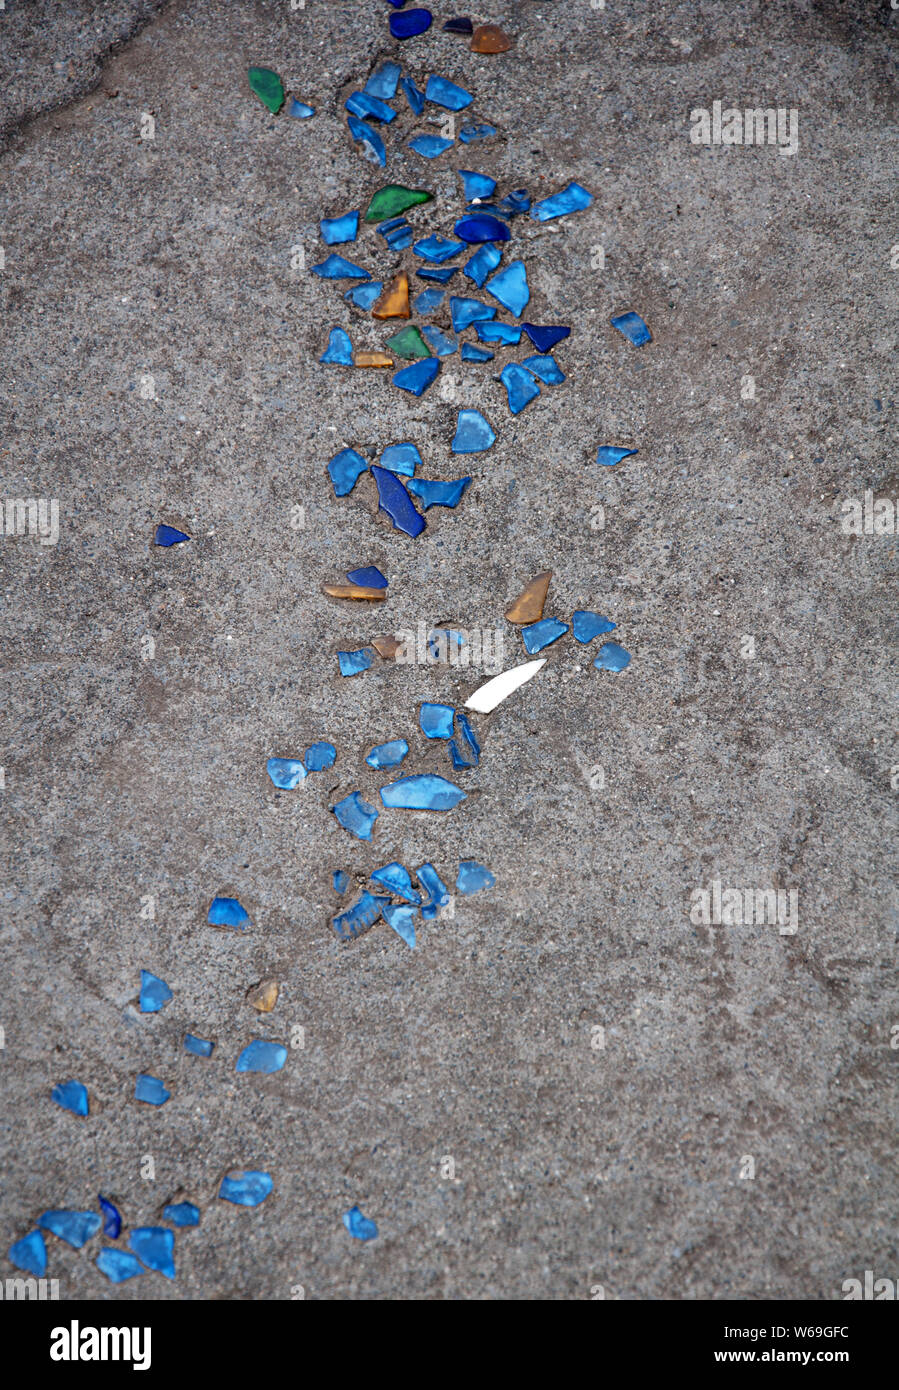 Seaglass embedded in concrete in this vertical image for great texture and interest for a graphic design element.  Blues and greens sea glass. Stock Photo